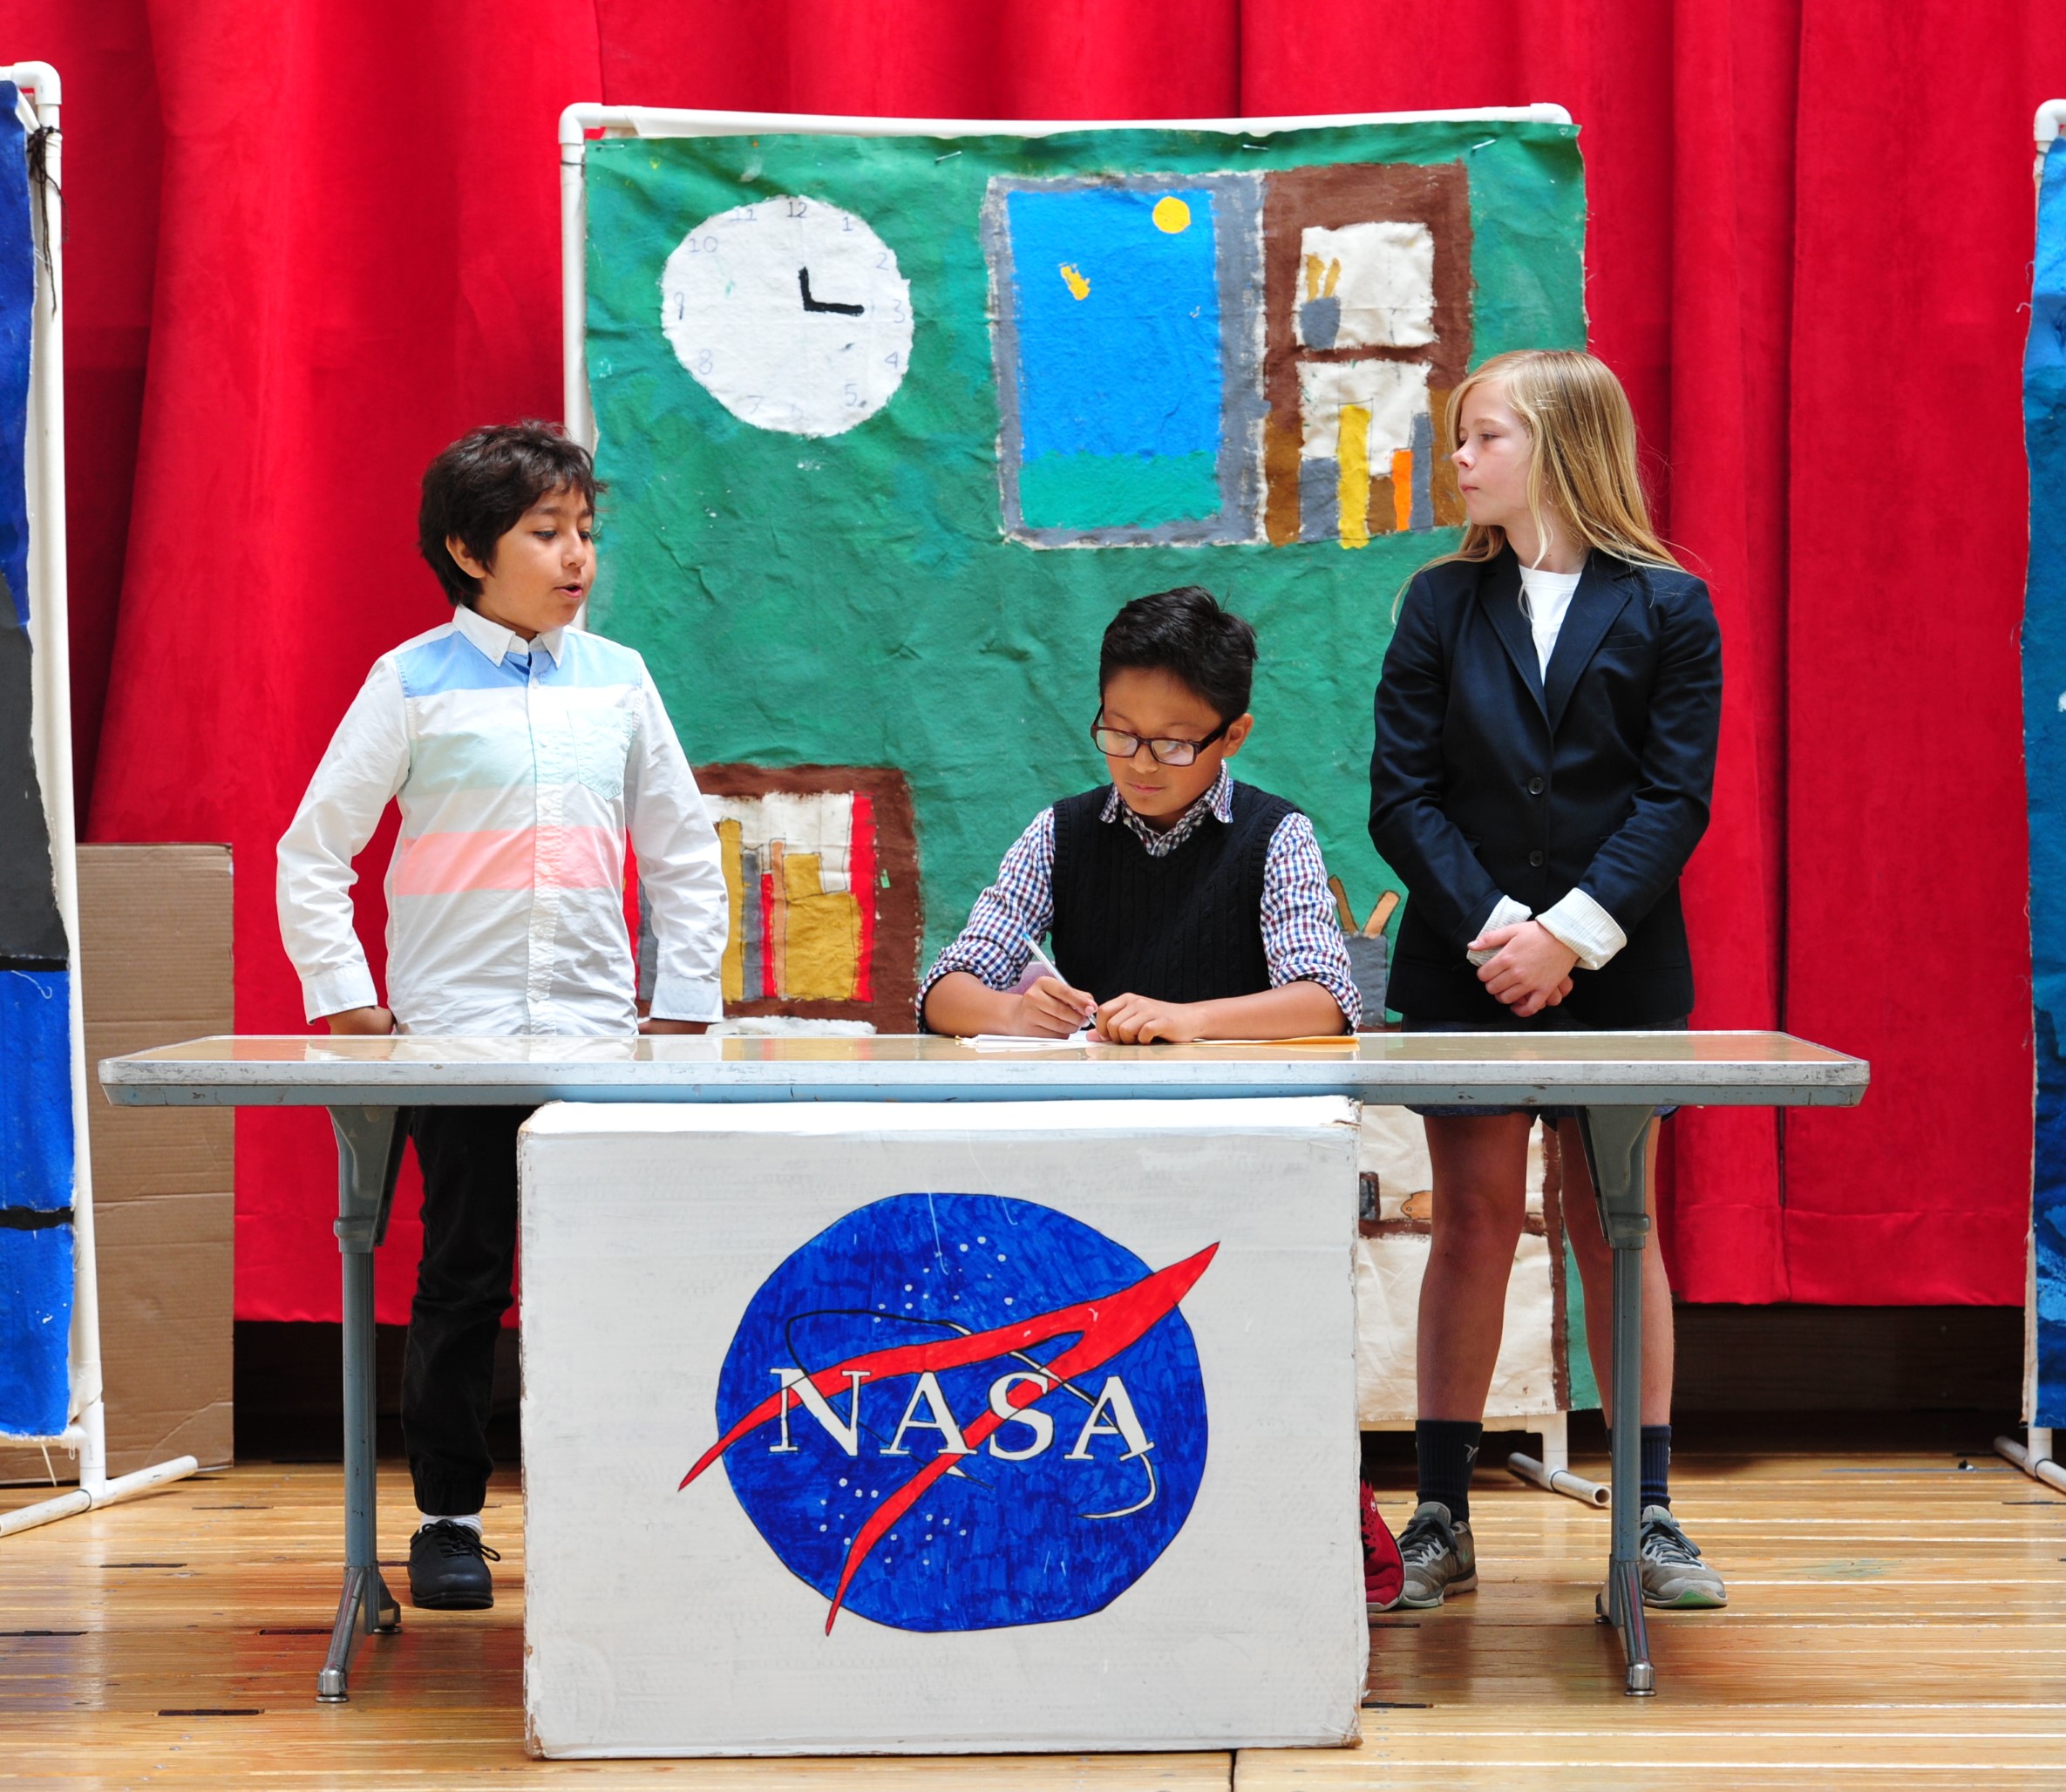 Students putting on a performance about NASA